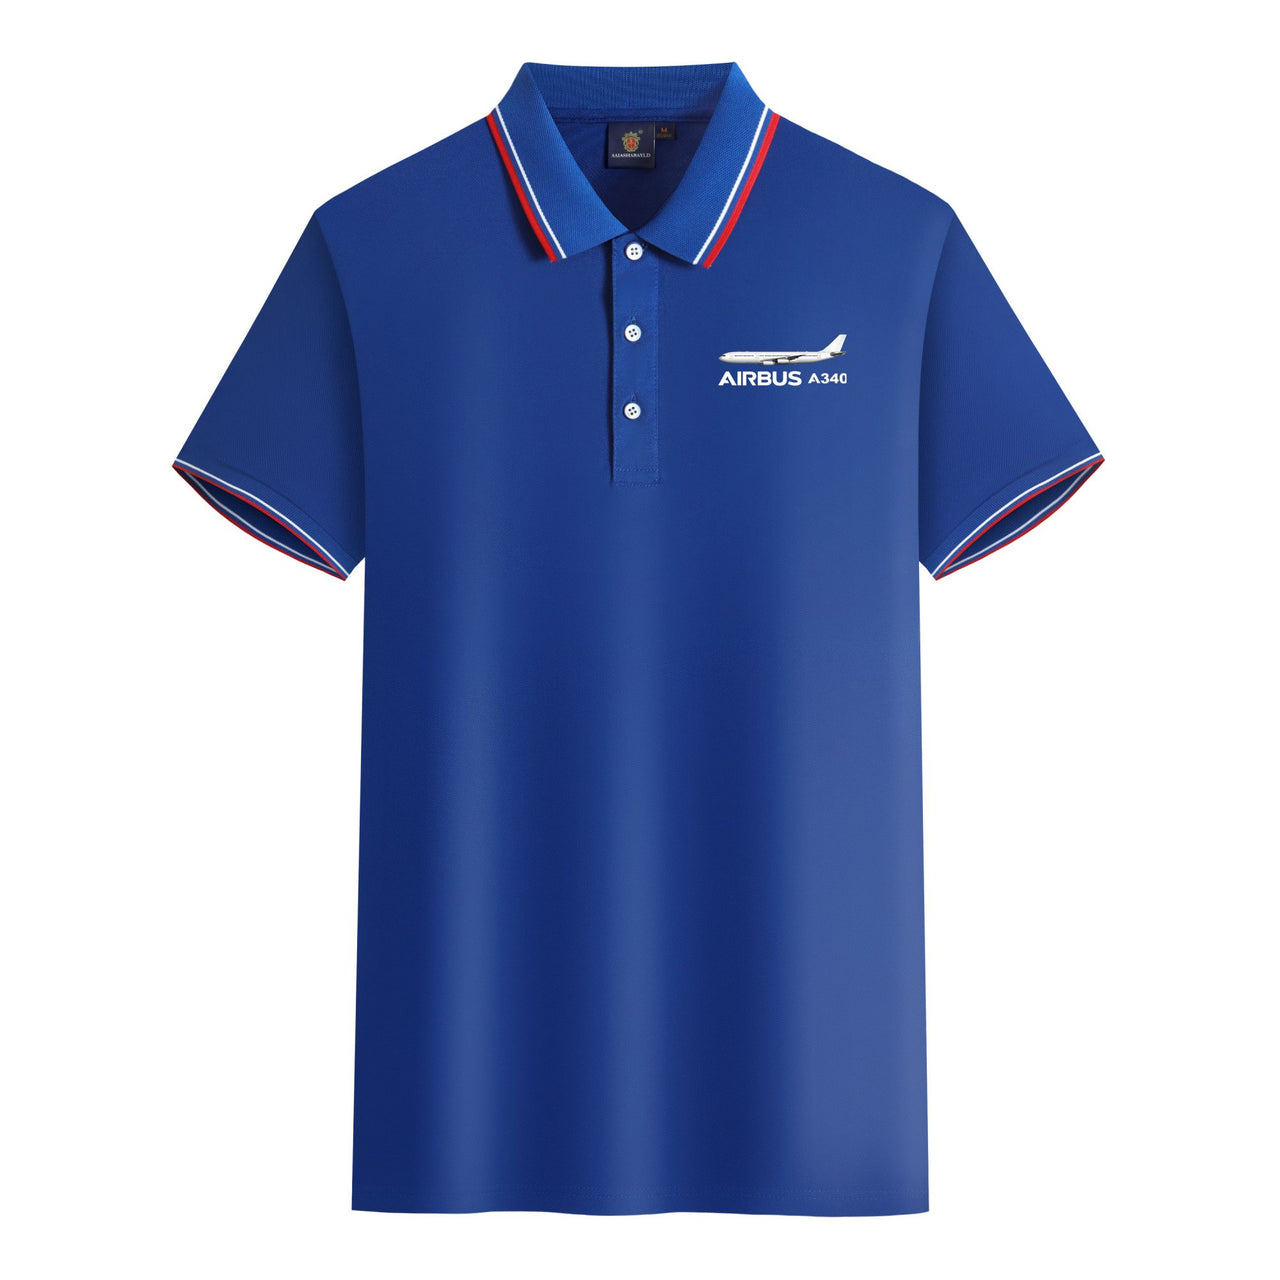 The Airbus A340 Designed Stylish Polo T-Shirts